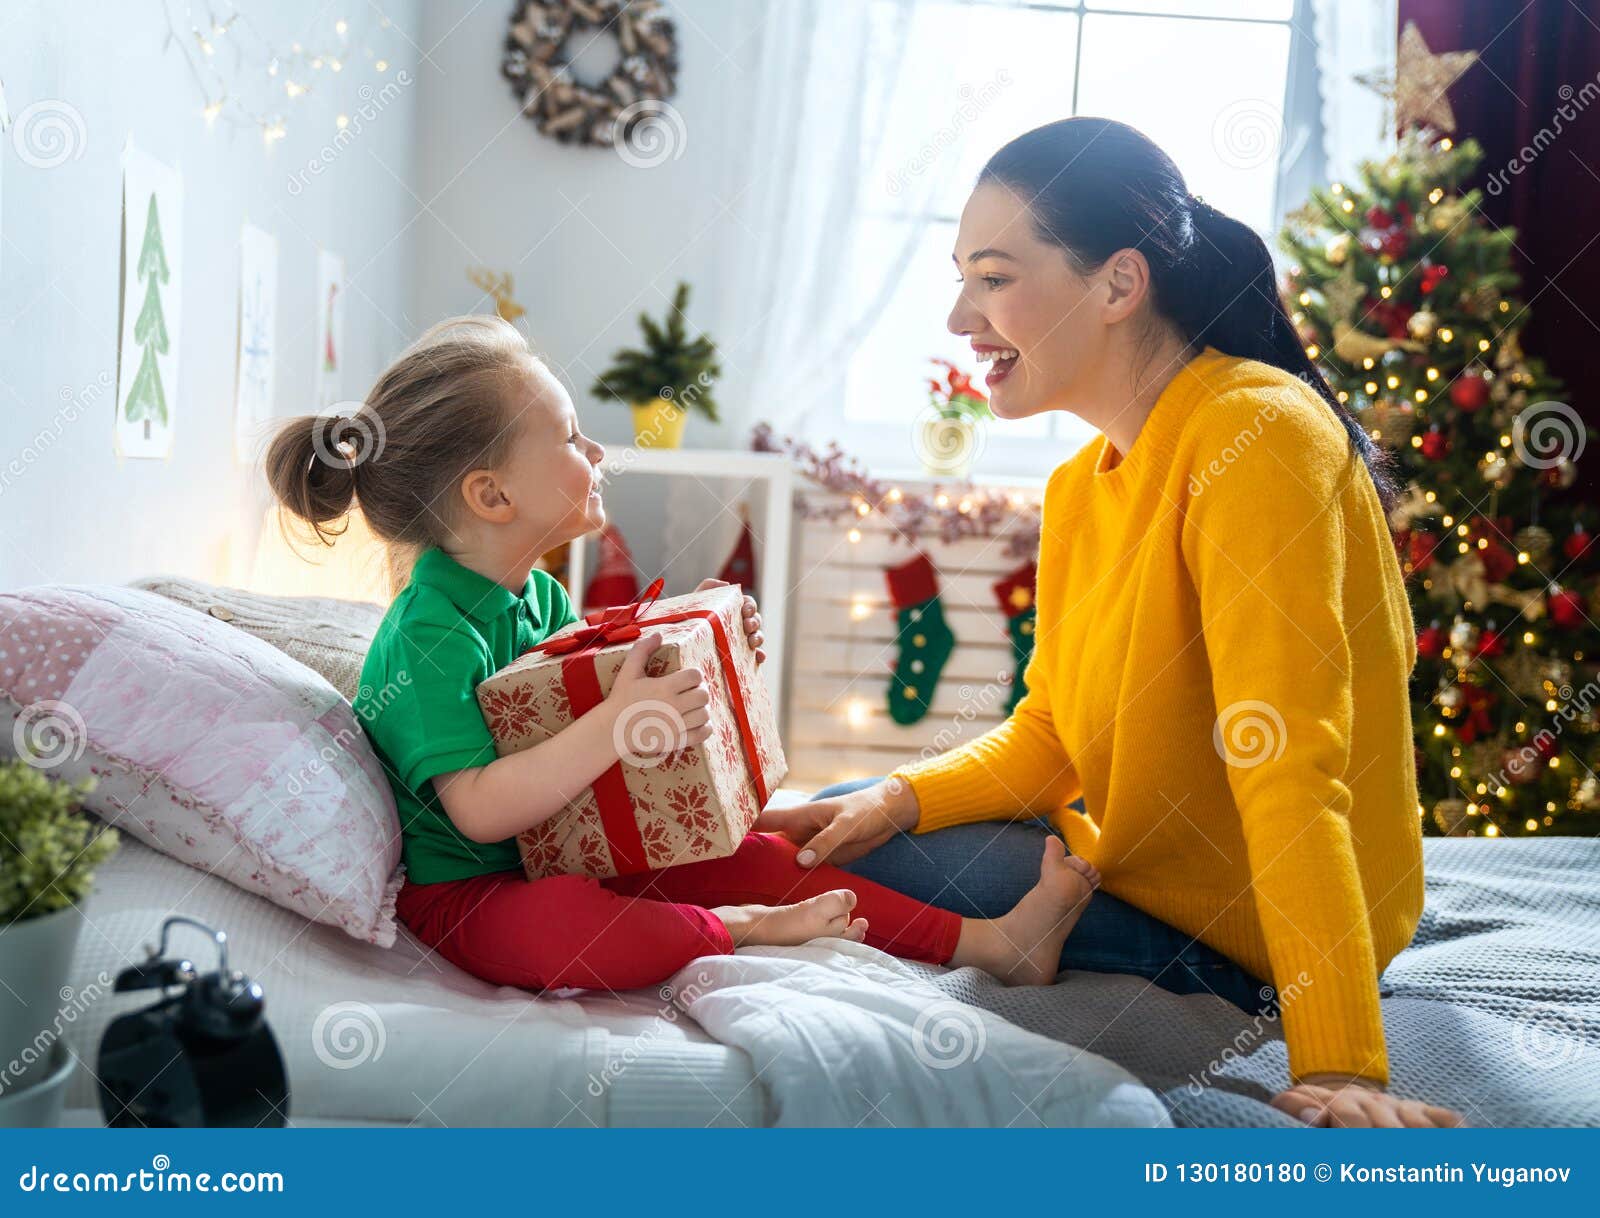 https://thumbs.dreamstime.com/z/mom-giving-gift-to-daughter-merry-christmas-happy-holidays-cheerful-her-cute-girl-parent-little-child-near-tree-indoors-loving-130180180.jpg